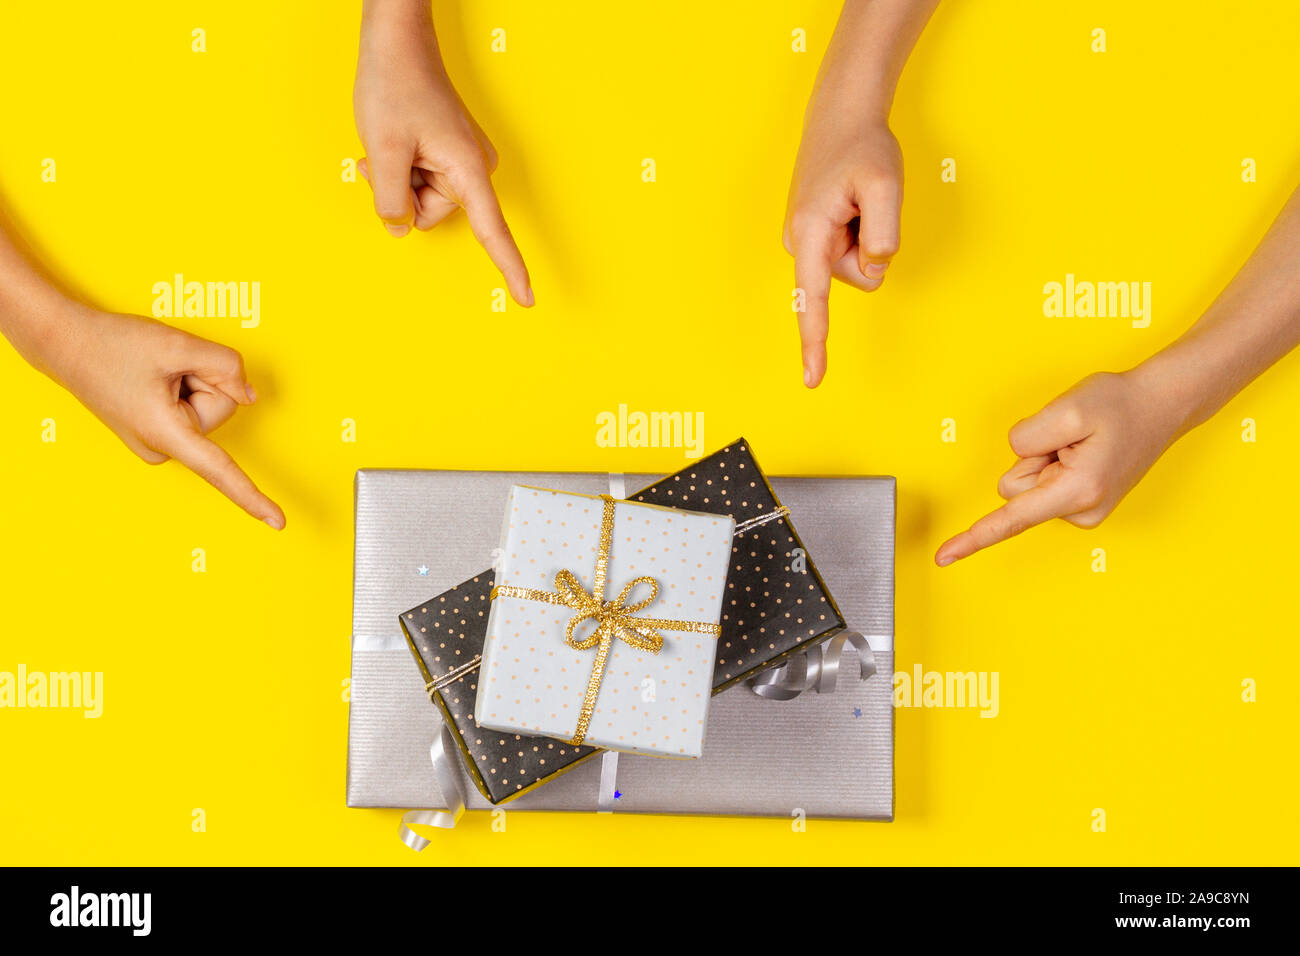 Many hands pointing to wrapped present gift boxes on yellow background. Top view Stock Photo